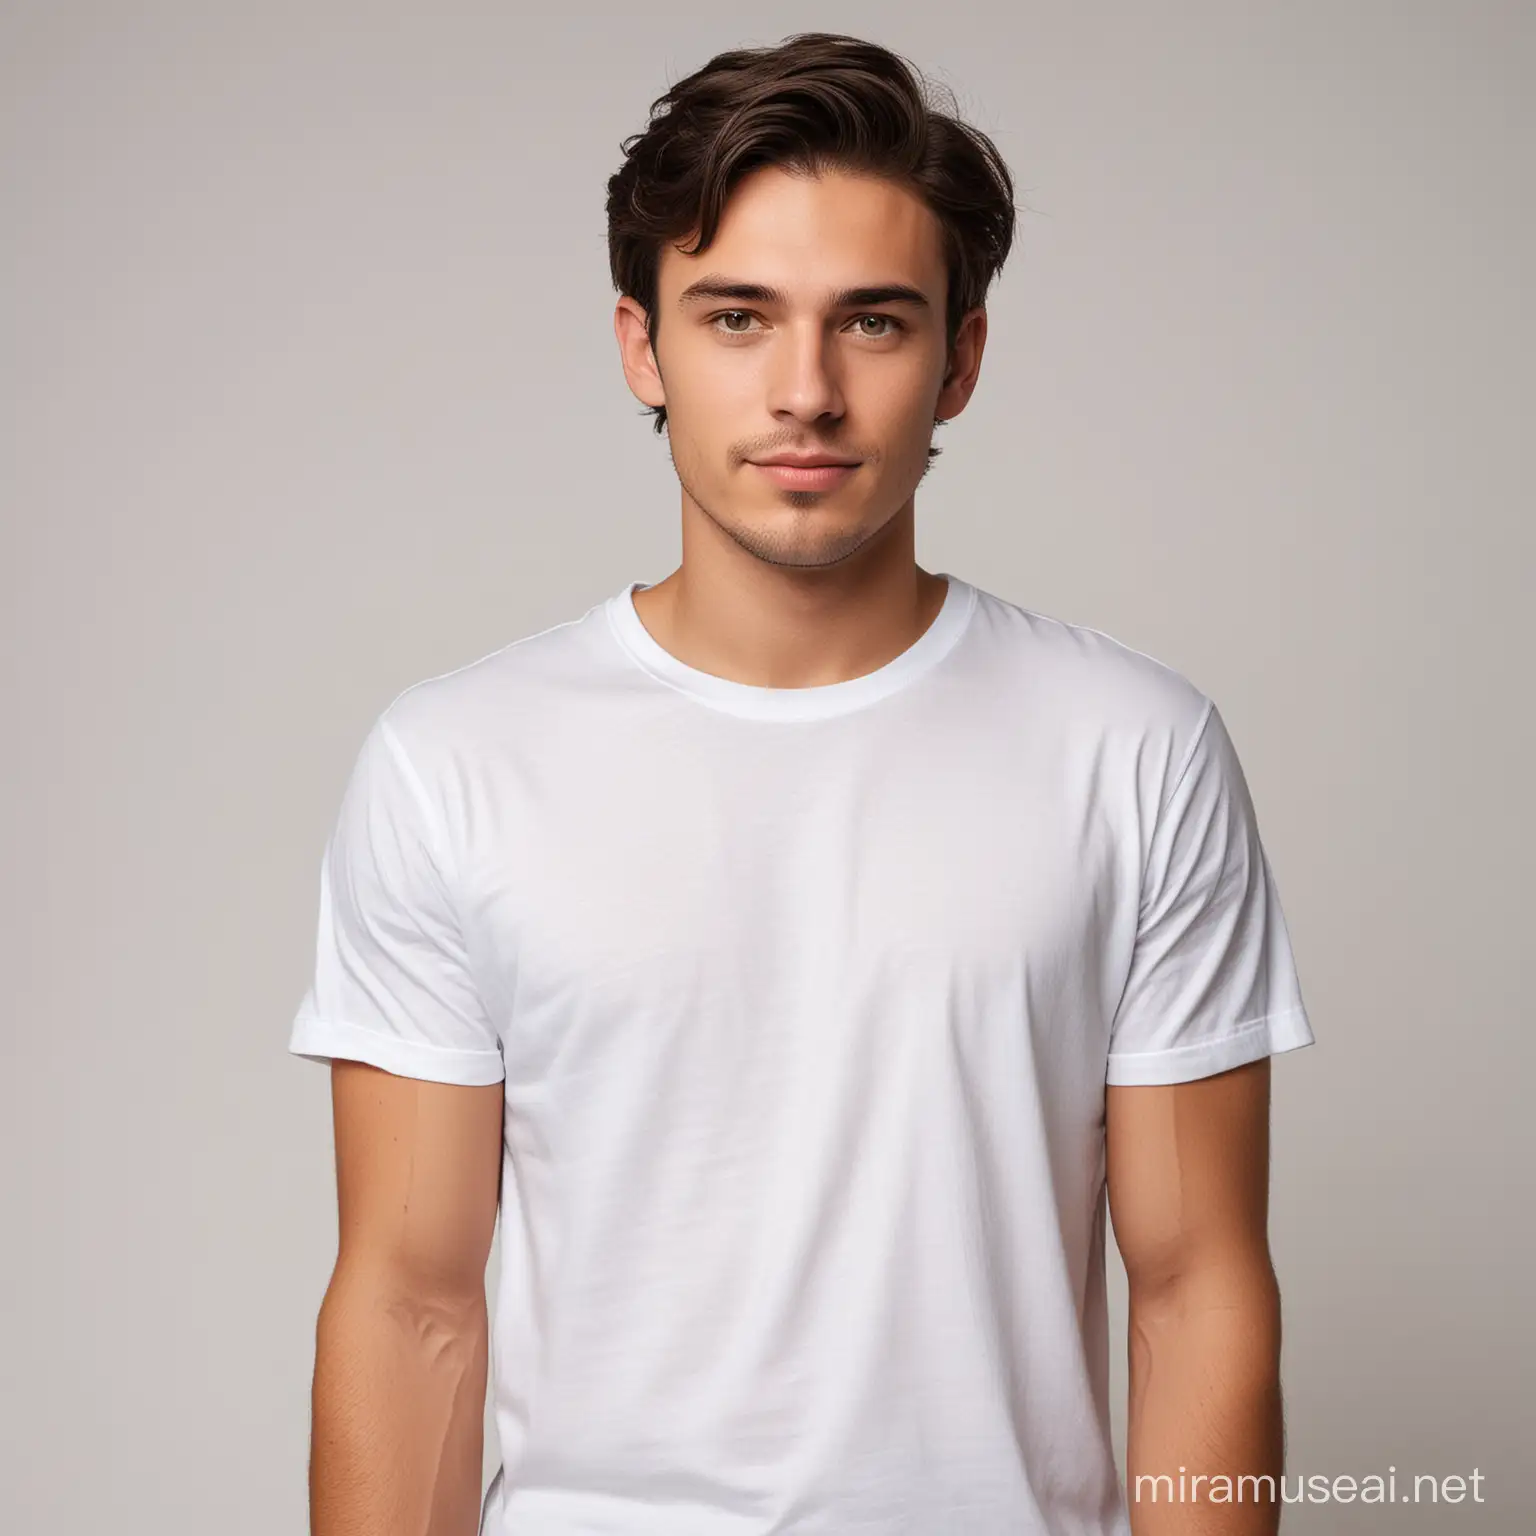 A young adult wearing plain white tshirt with a light background